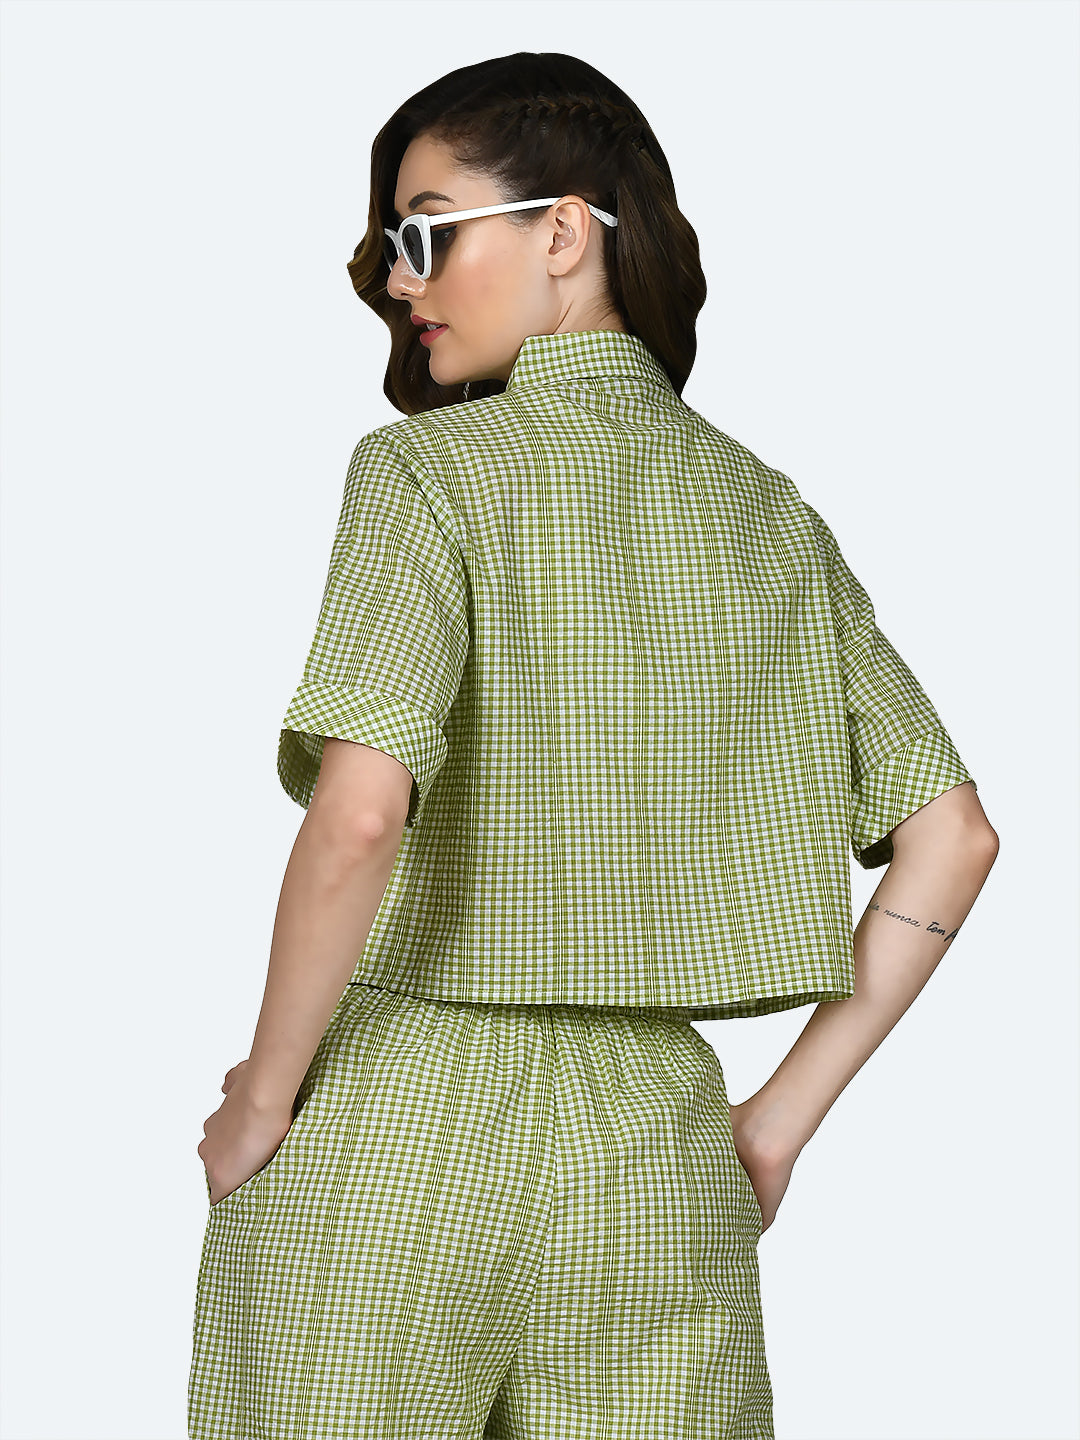 Multicolored Checked Buttoned Top For Women